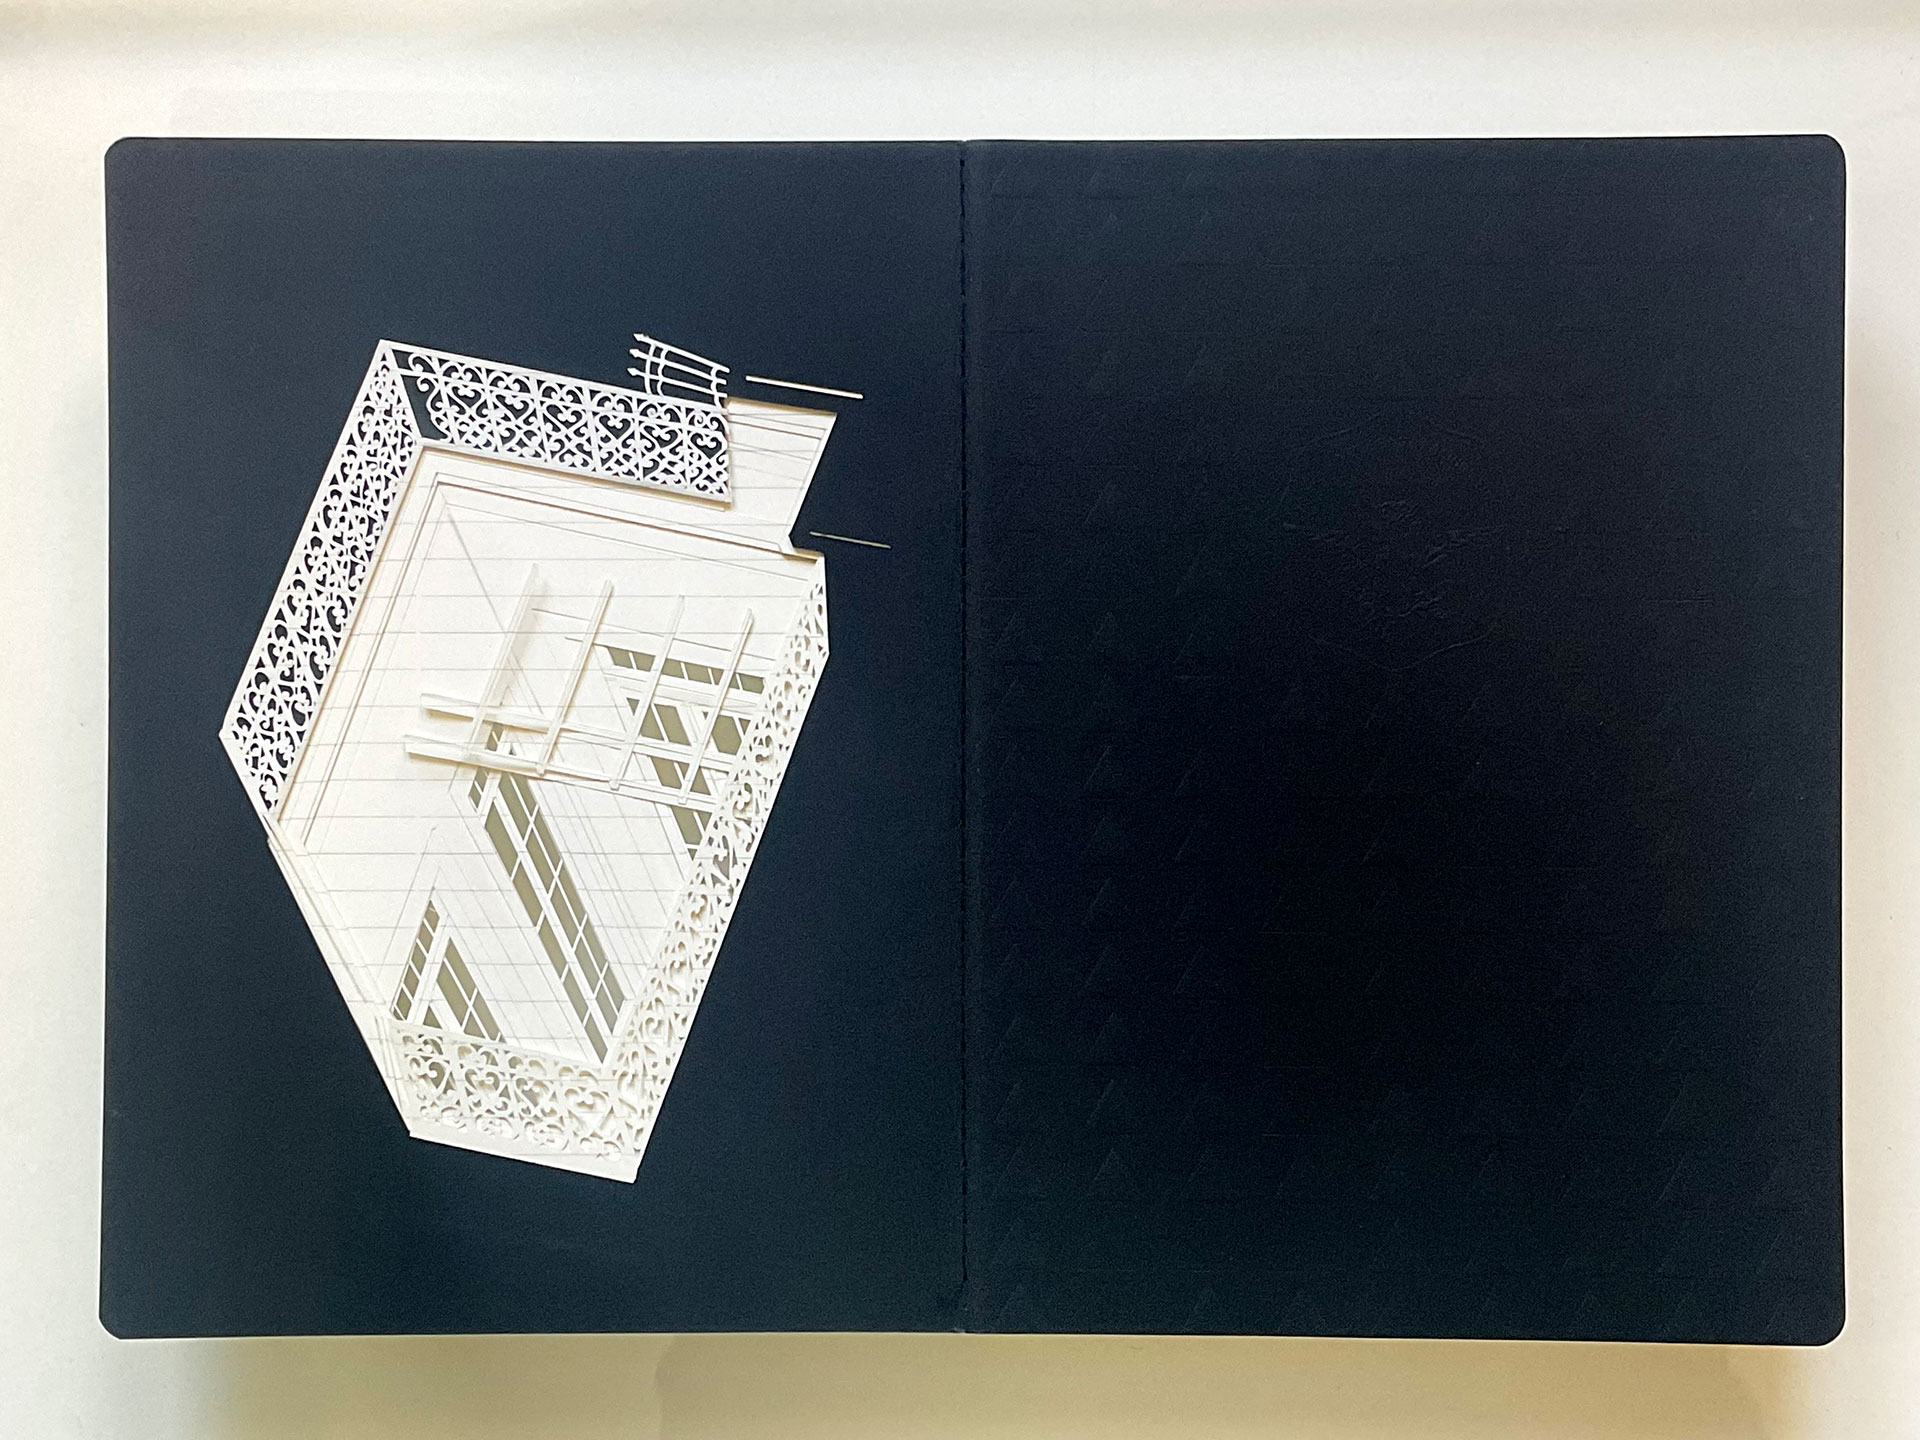 Fragment from the series of architectural papers that Camacho worked on before paintings 